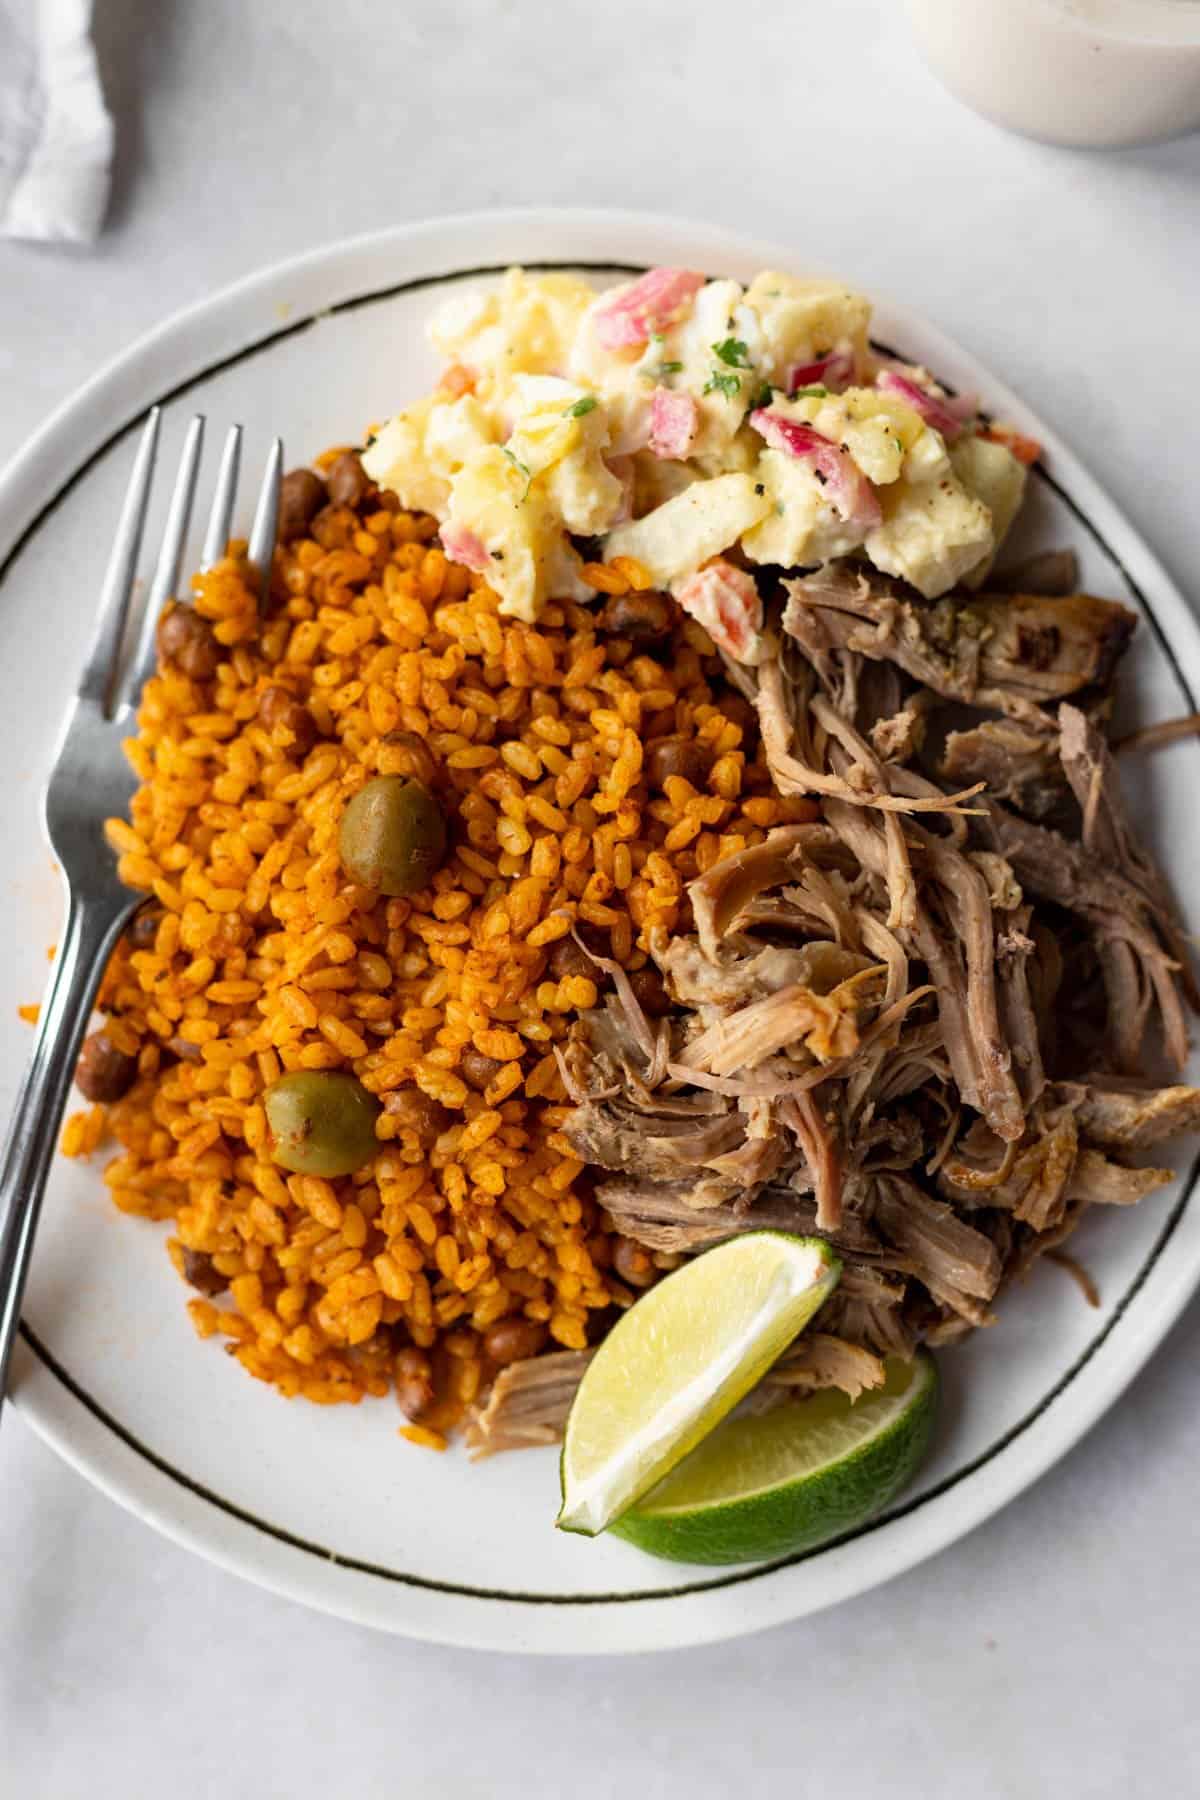 pigeon peas and rice on a plate with pernil (roasted pork shoulder), and russian-style potato salad.